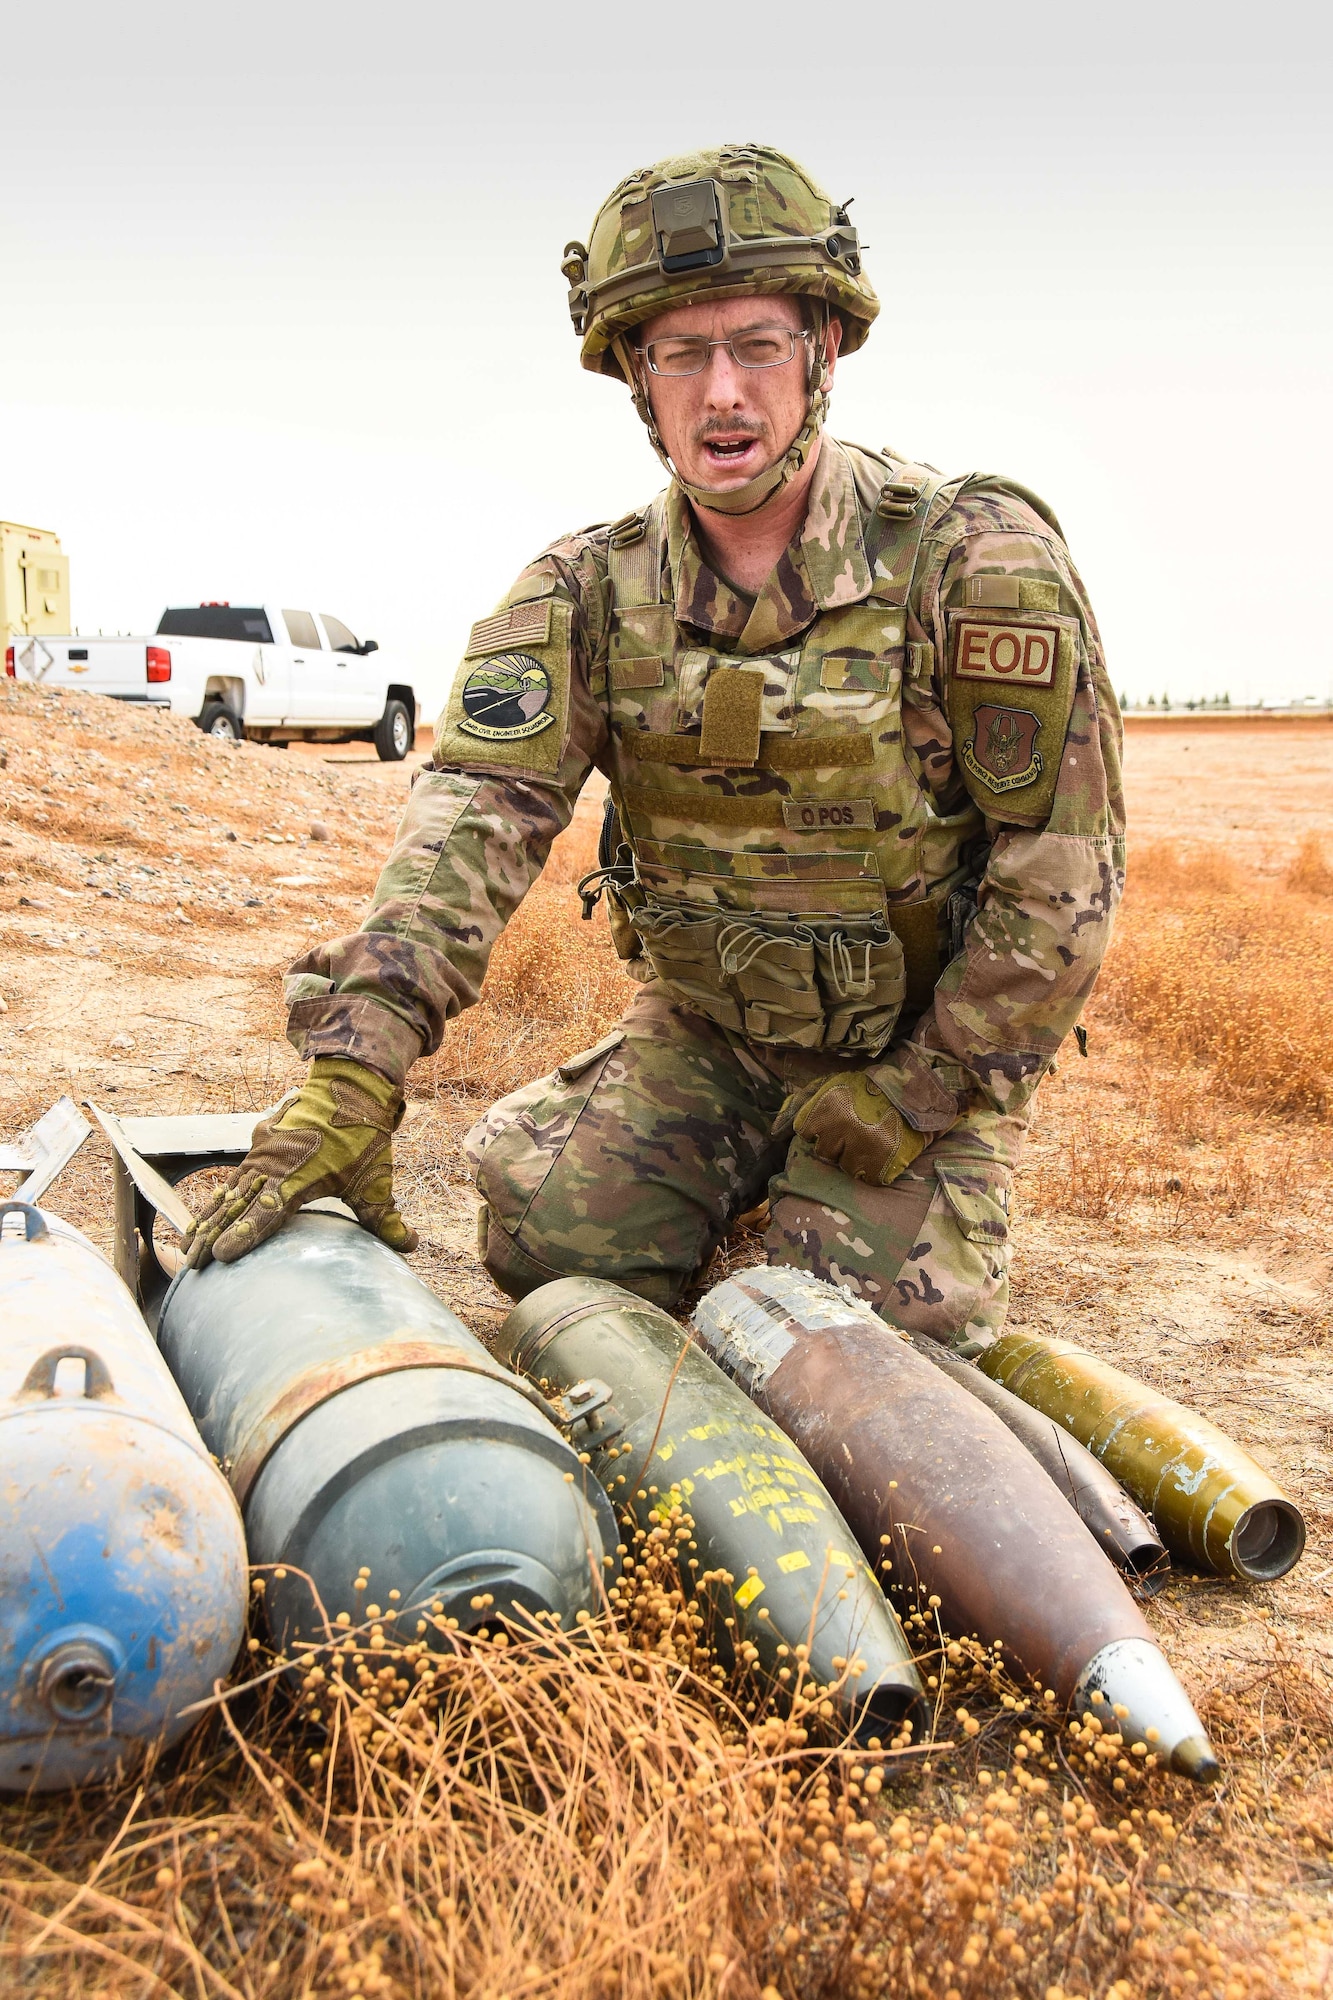 “In real life, you have to apply whatever lessons life gives you to what other people might be going through.”
This is the guiding philosophy for Master Sgt. Matthew Patnaude, 944th Civil Engineer Squadron Explosive Ordnance Disposal flight chief. A soft spoken man with years of deployment experience, Patnaude lives his daily life sharing his knowledge and experience to help mentor others.